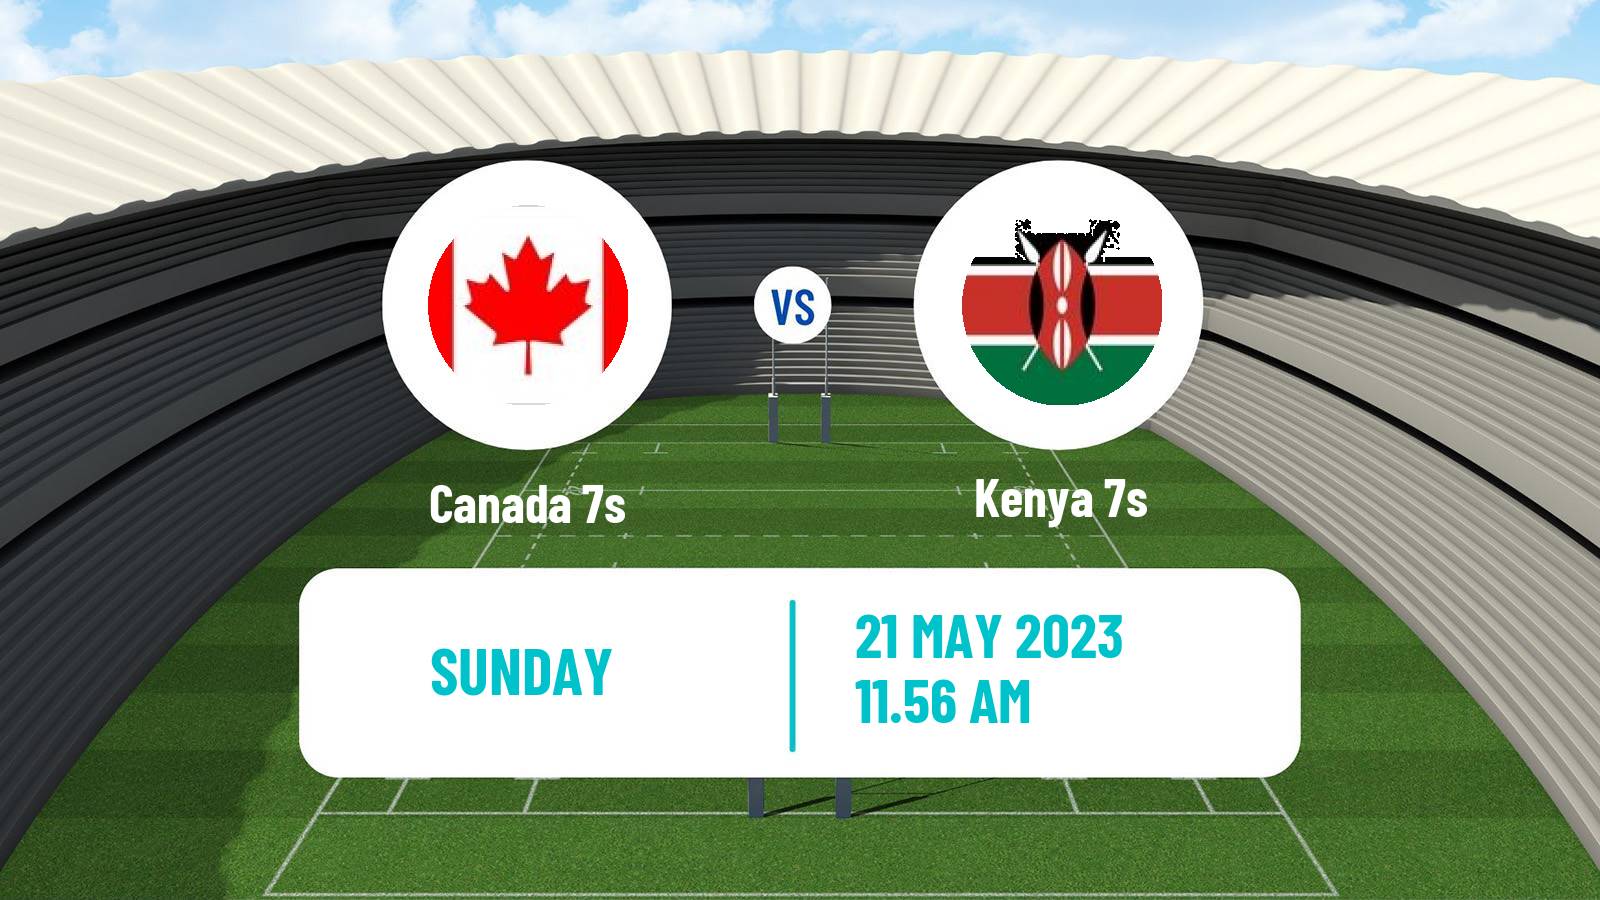 Rugby union Sevens World Series - England Canada 7s - Kenya 7s